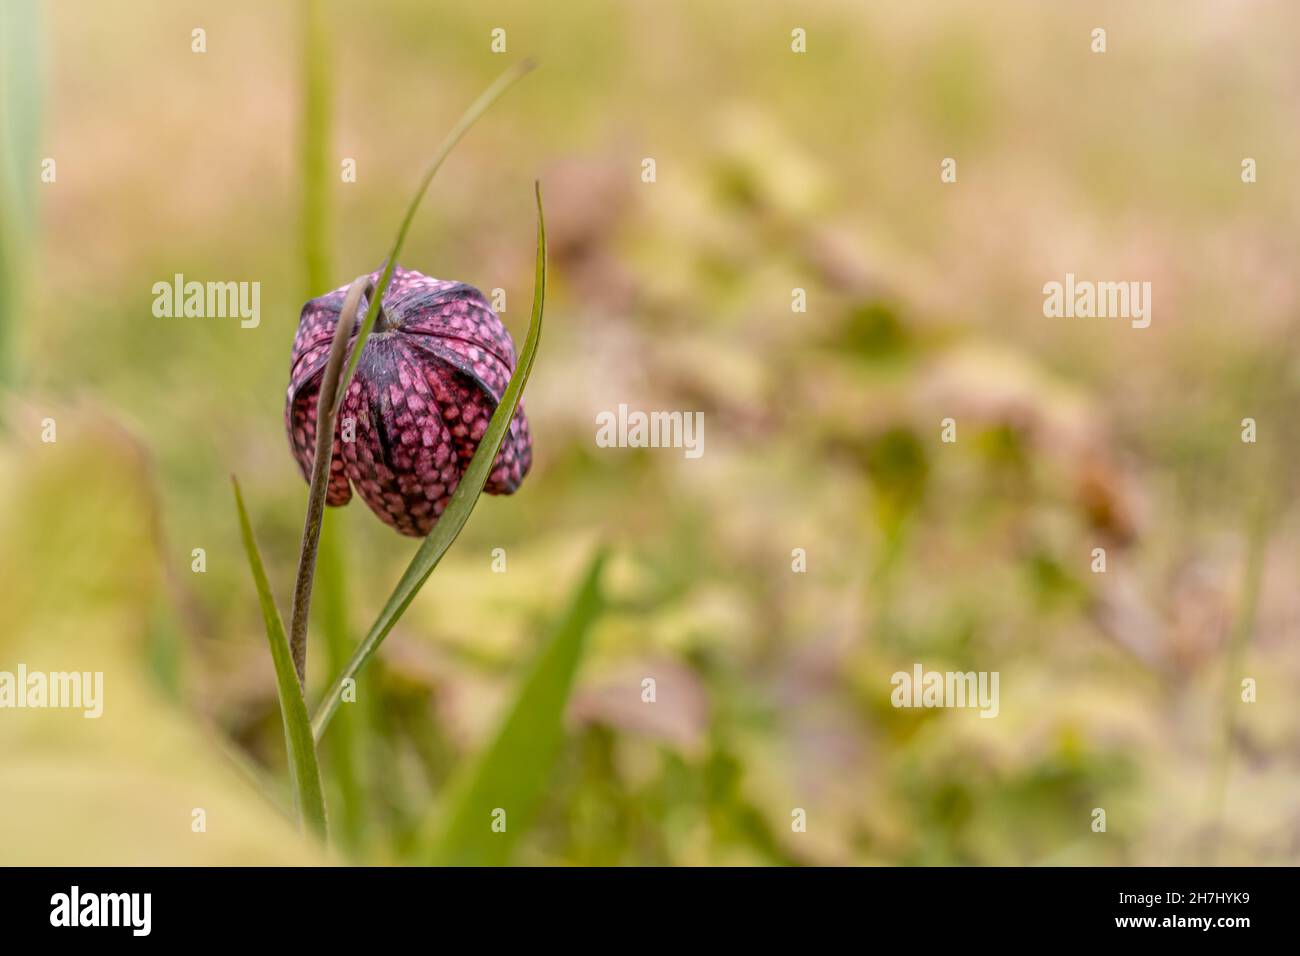 Spring background with a purple chess flower (snake's head). Copyspace, shallow field of depth. Stock Photo